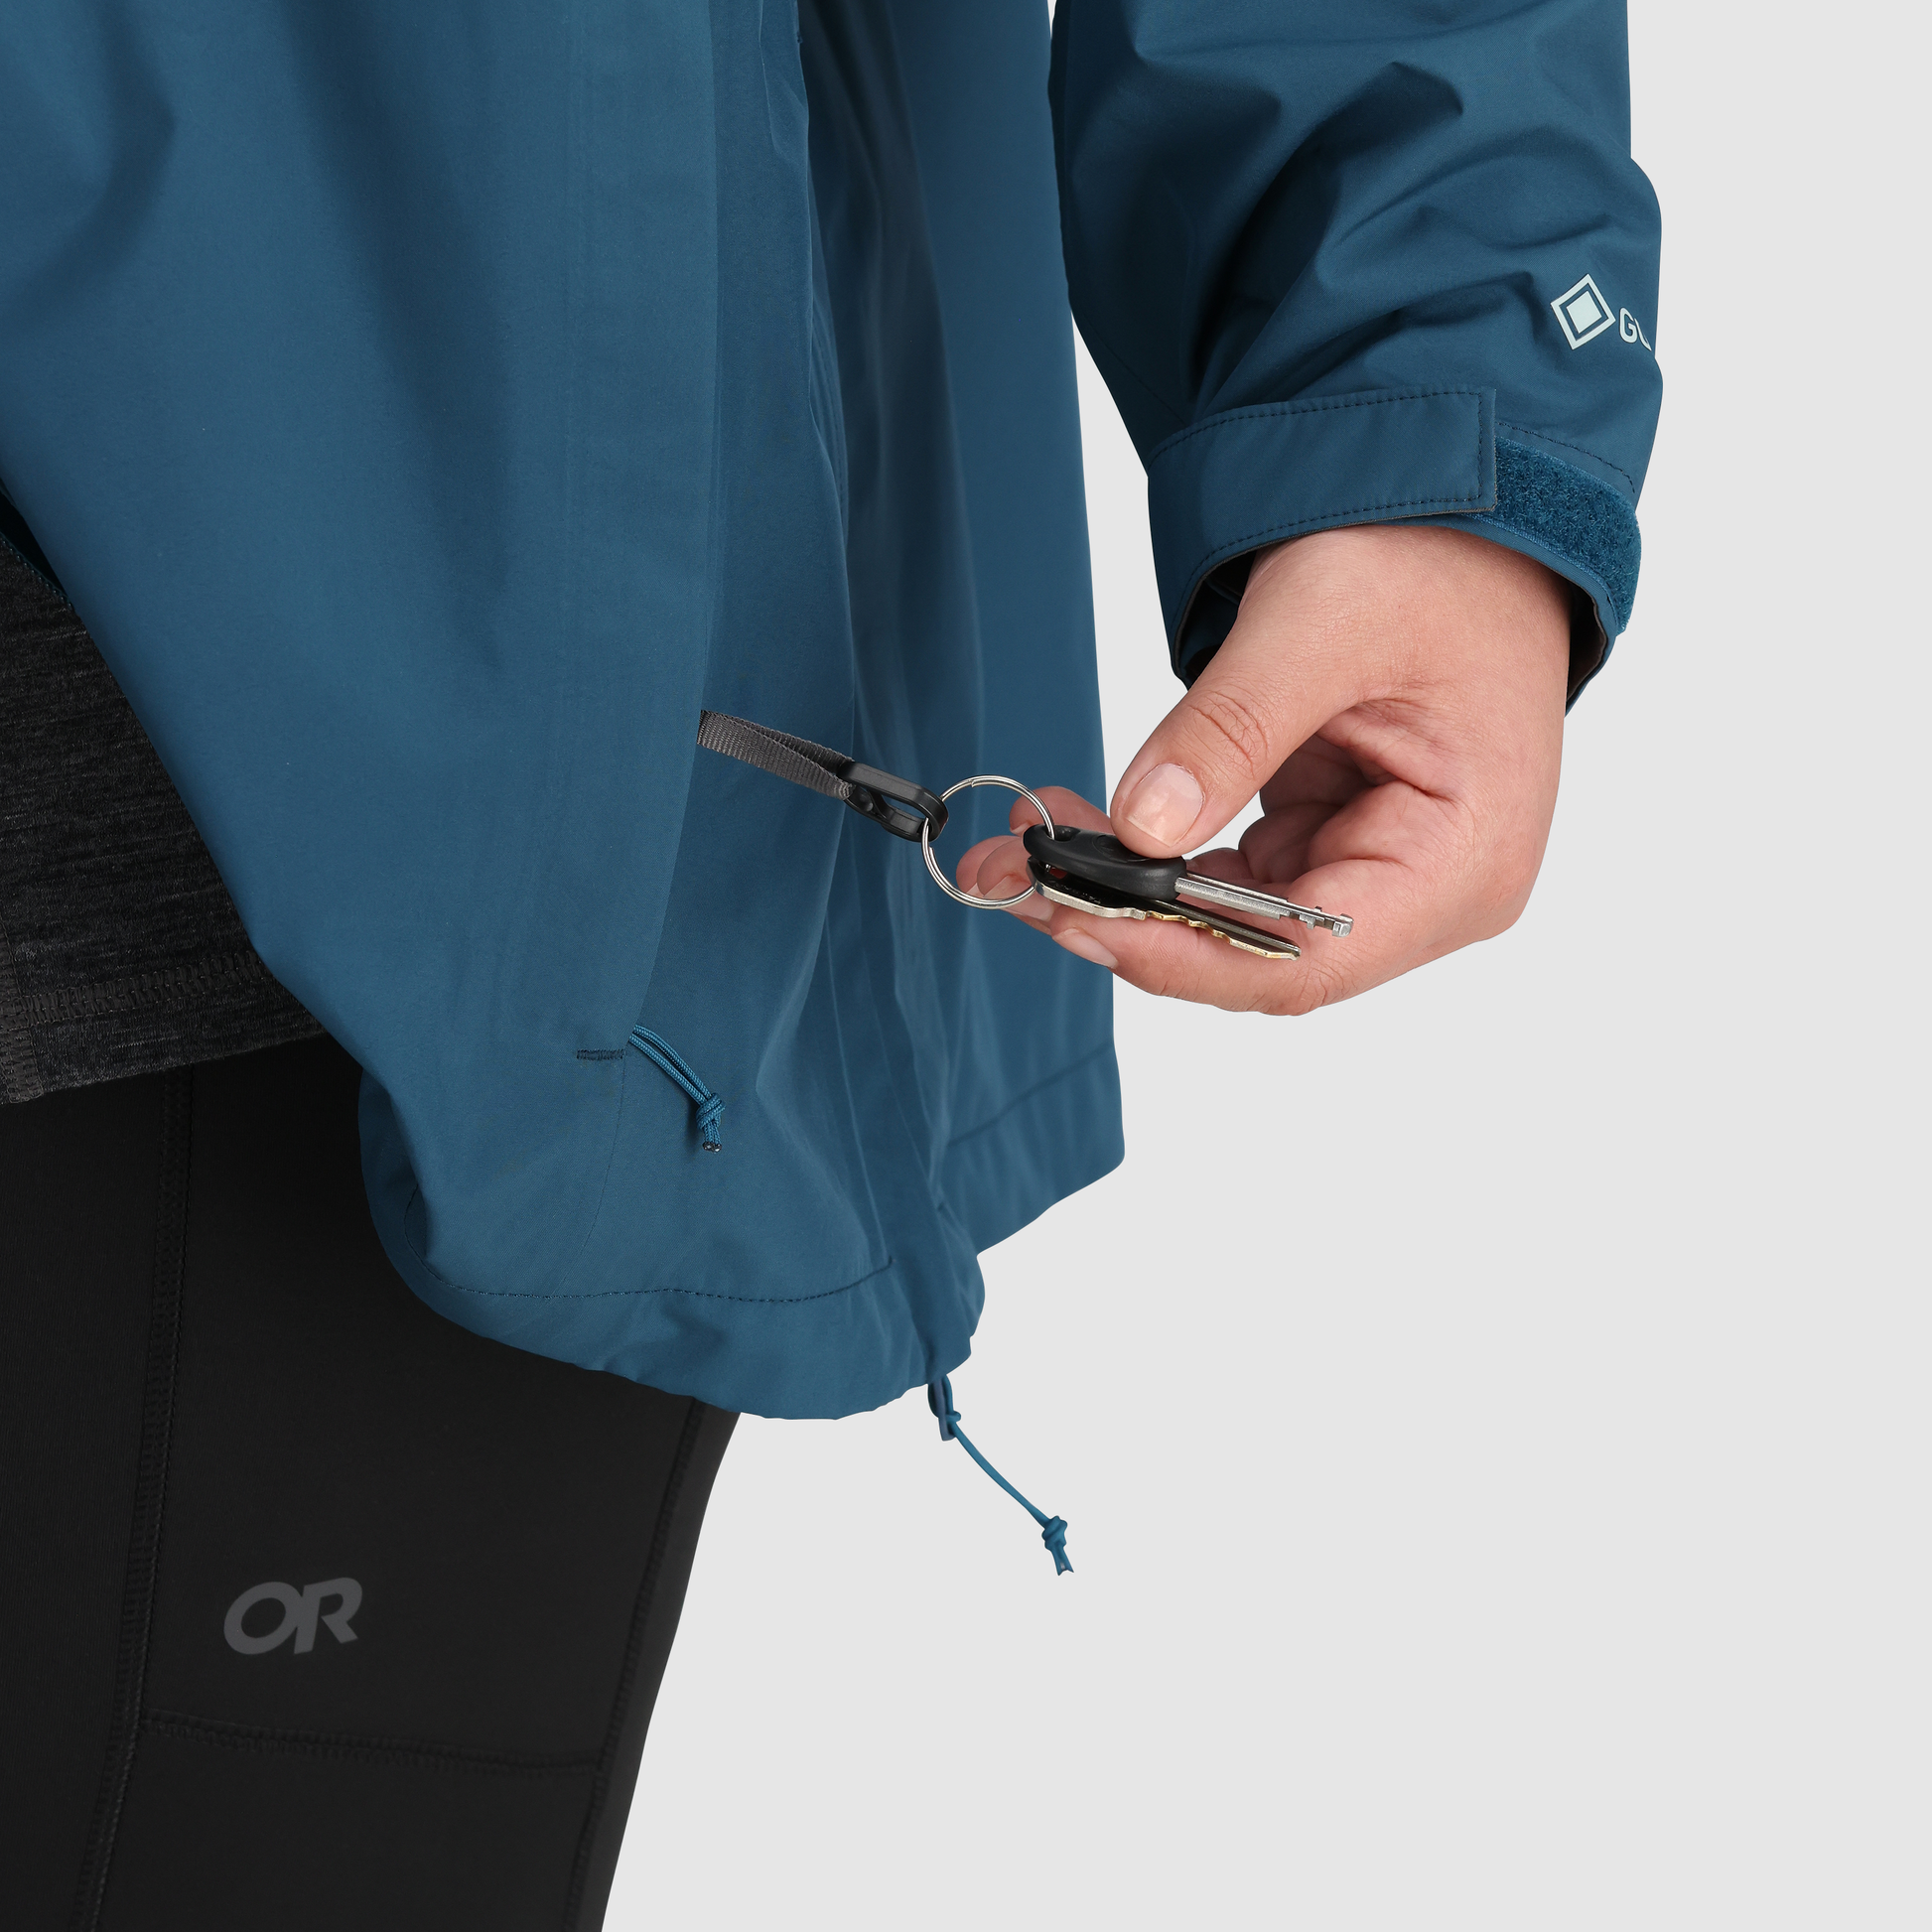 B3 :: Key Clip in Hand Pocket / Hidden clip easily attaches to your key ring for easy-access security.